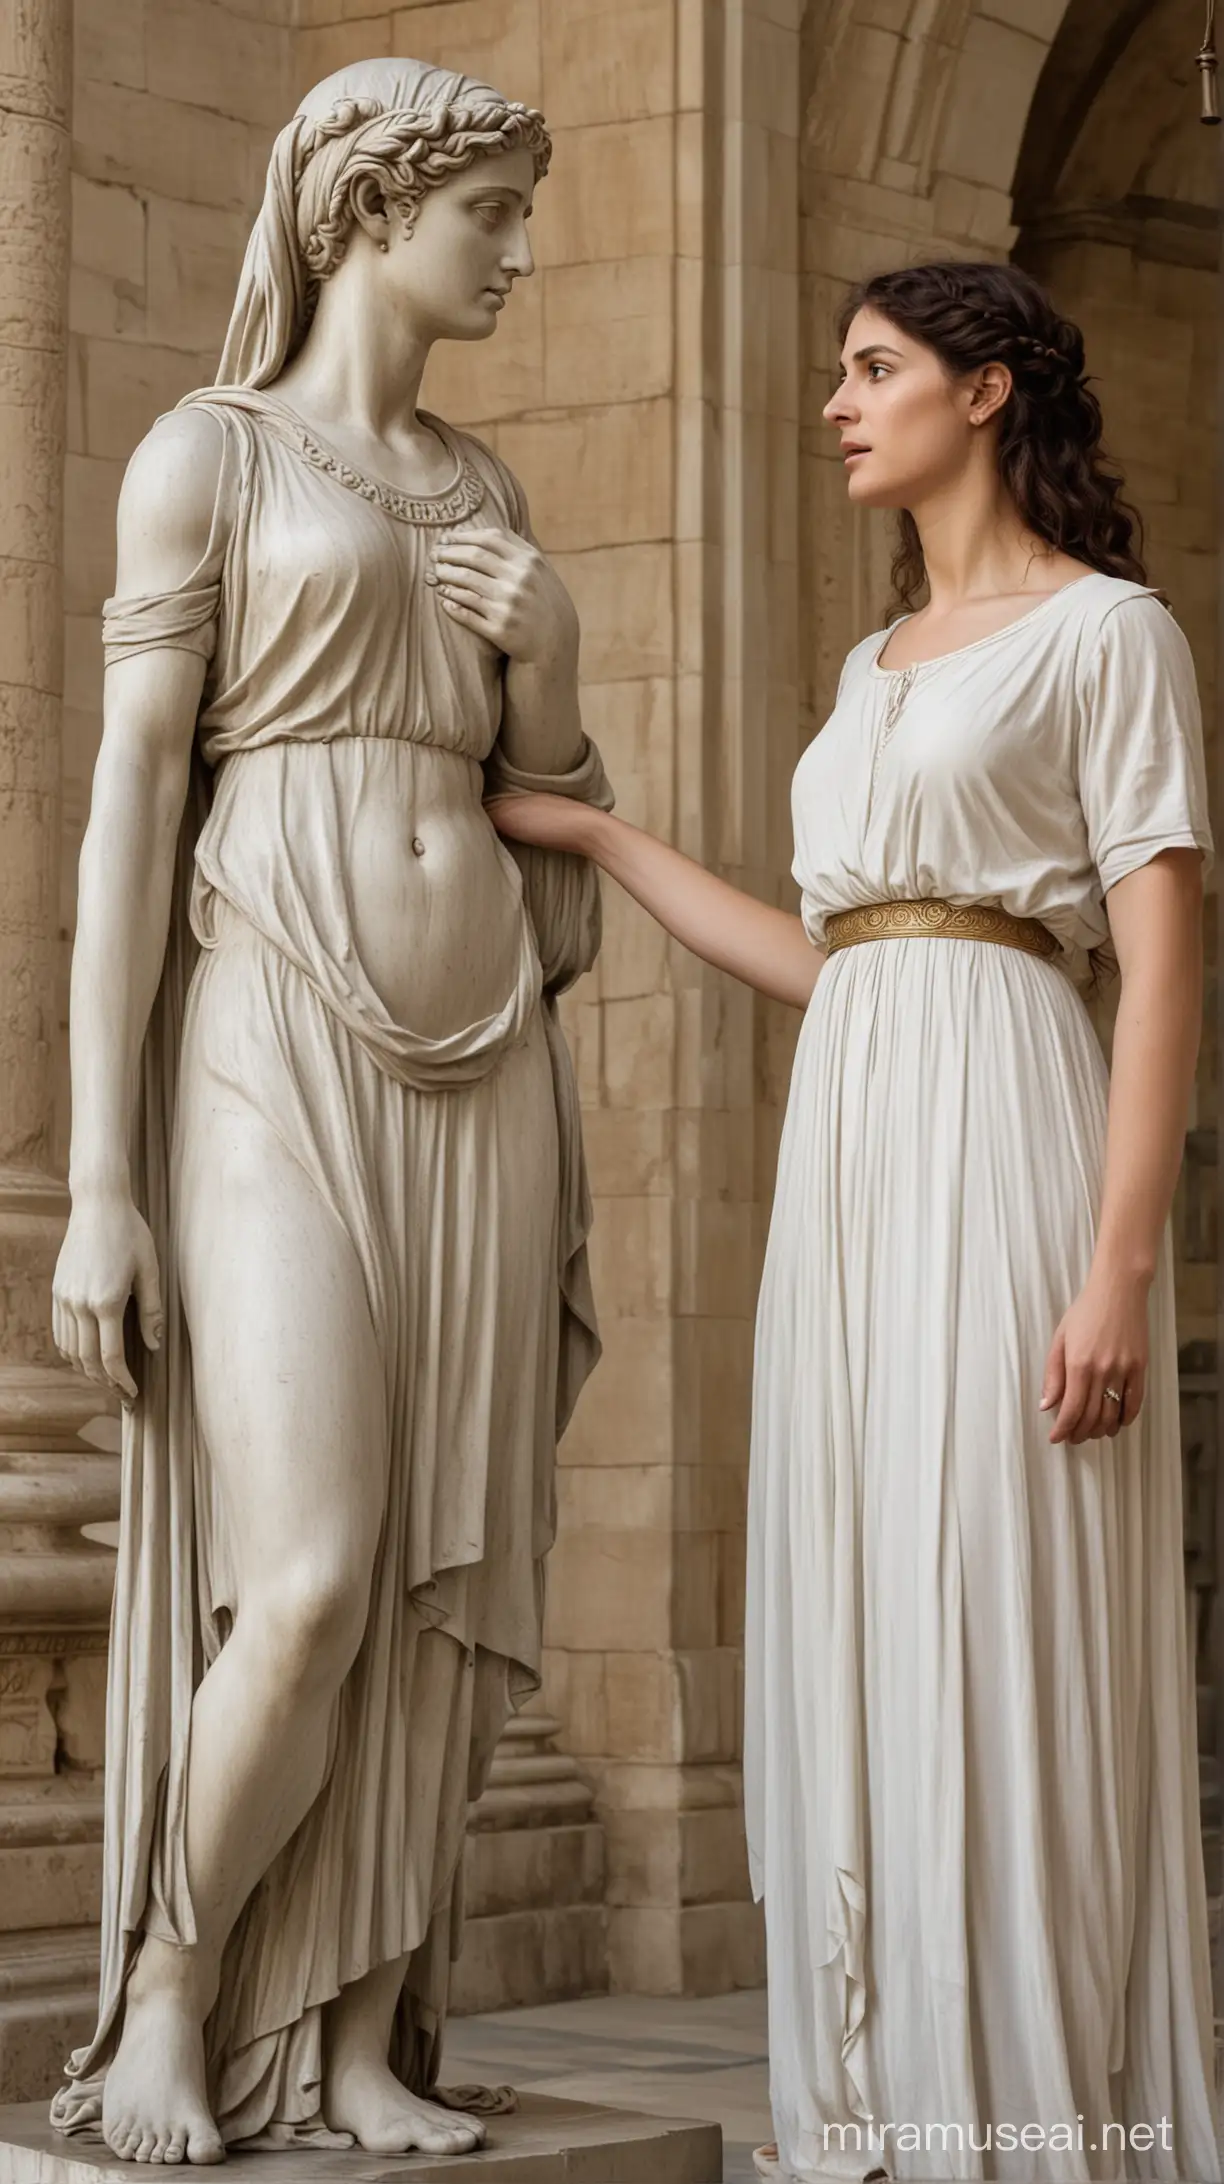 hypatia of alexandra, the real woman, admiring a statue of herself